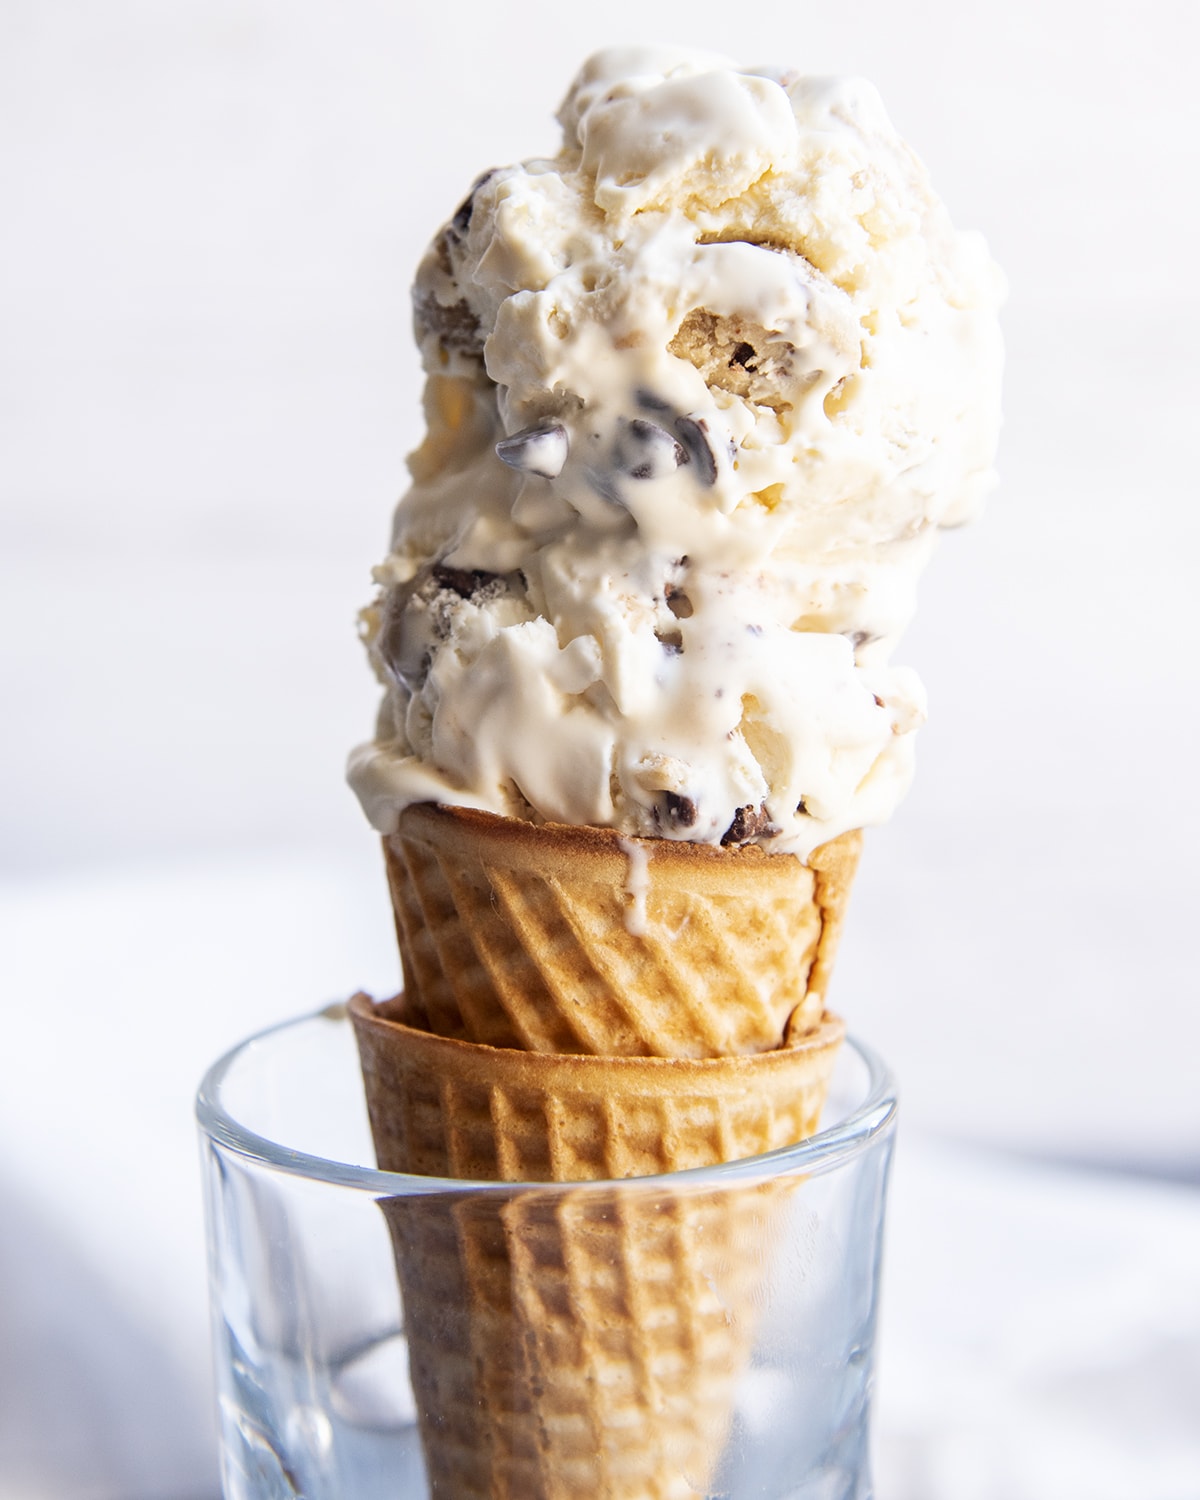 Two scoops of chocolate chip cookie dough ice cream on a cone.